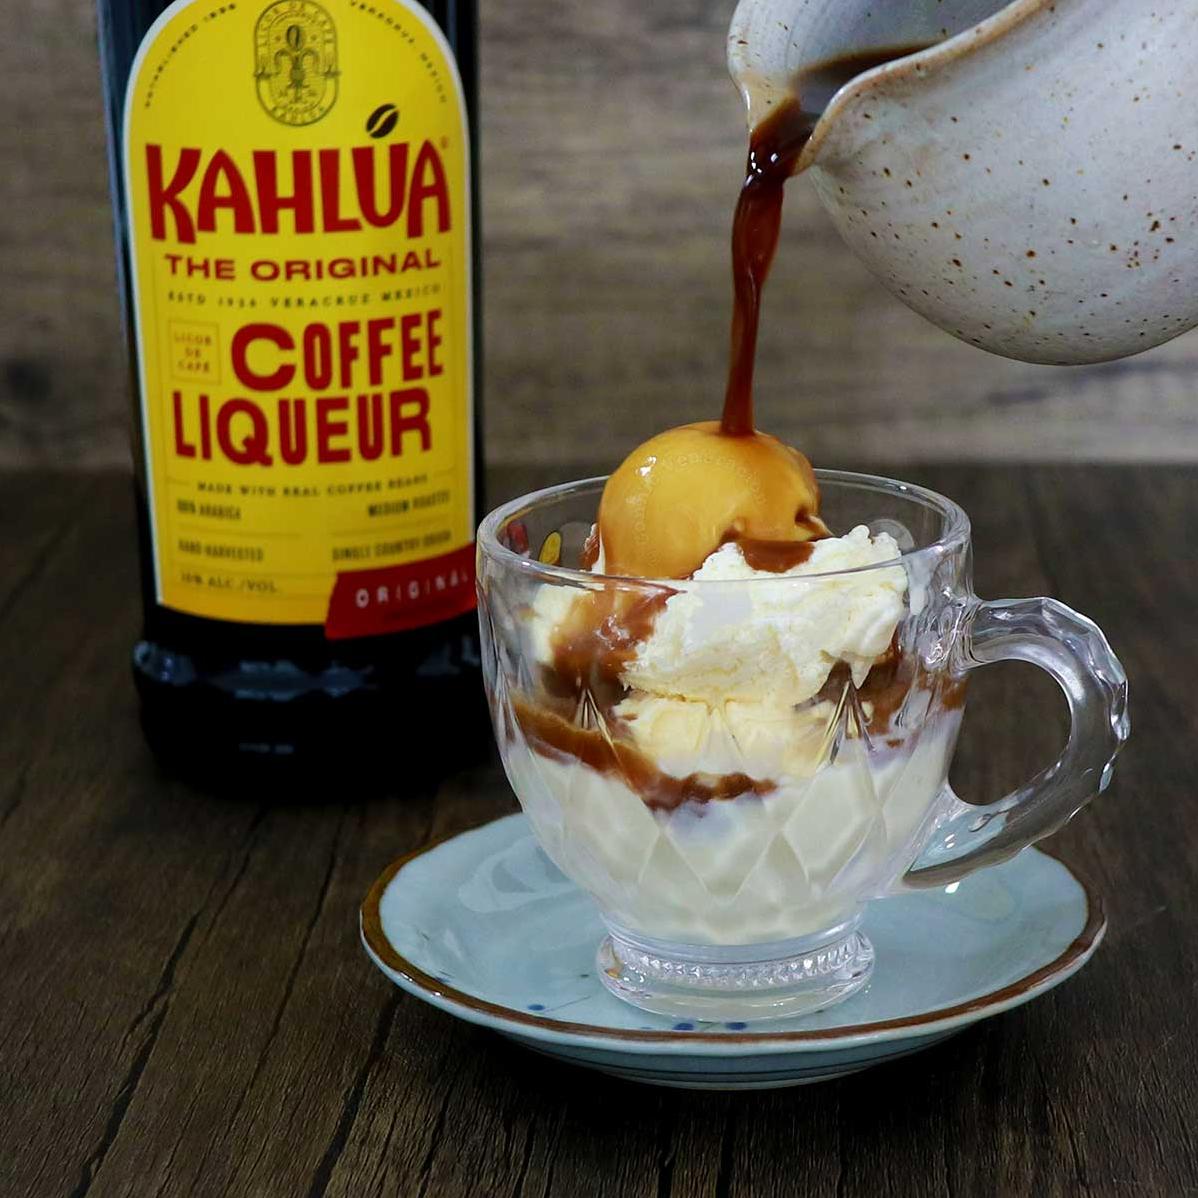  If you love the taste of coffee and ice cream, this recipe is for you.